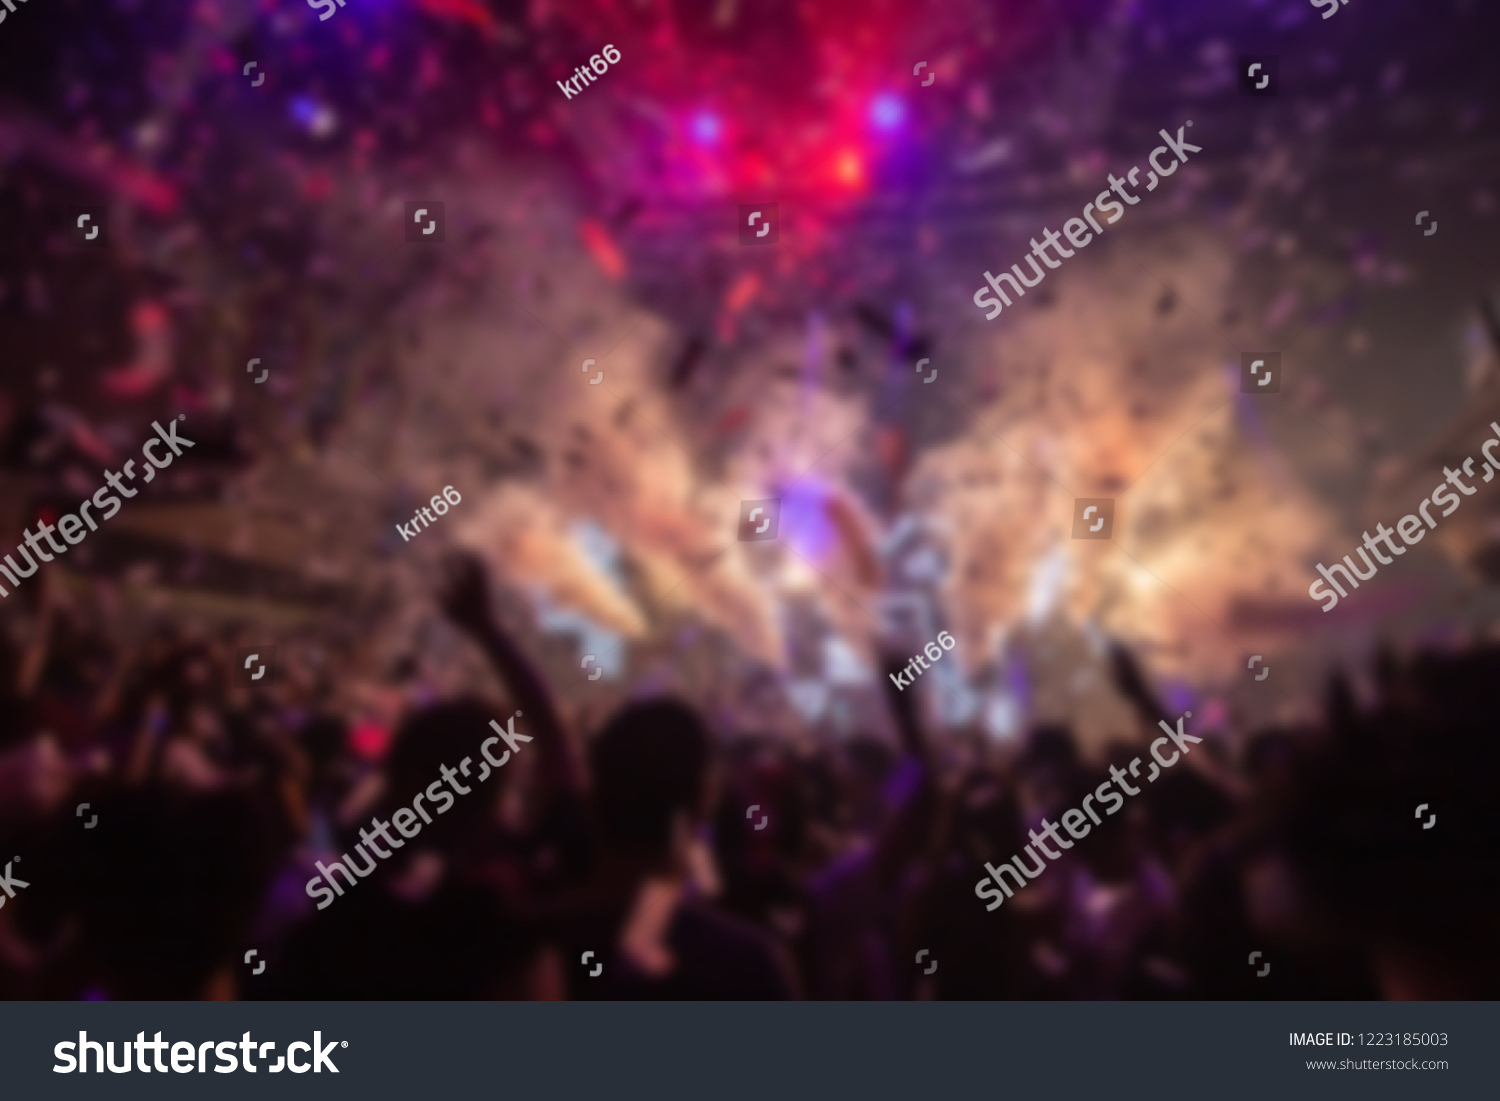 Effects blur Concert, disco dj party. People with hands up having fun  #1223185003